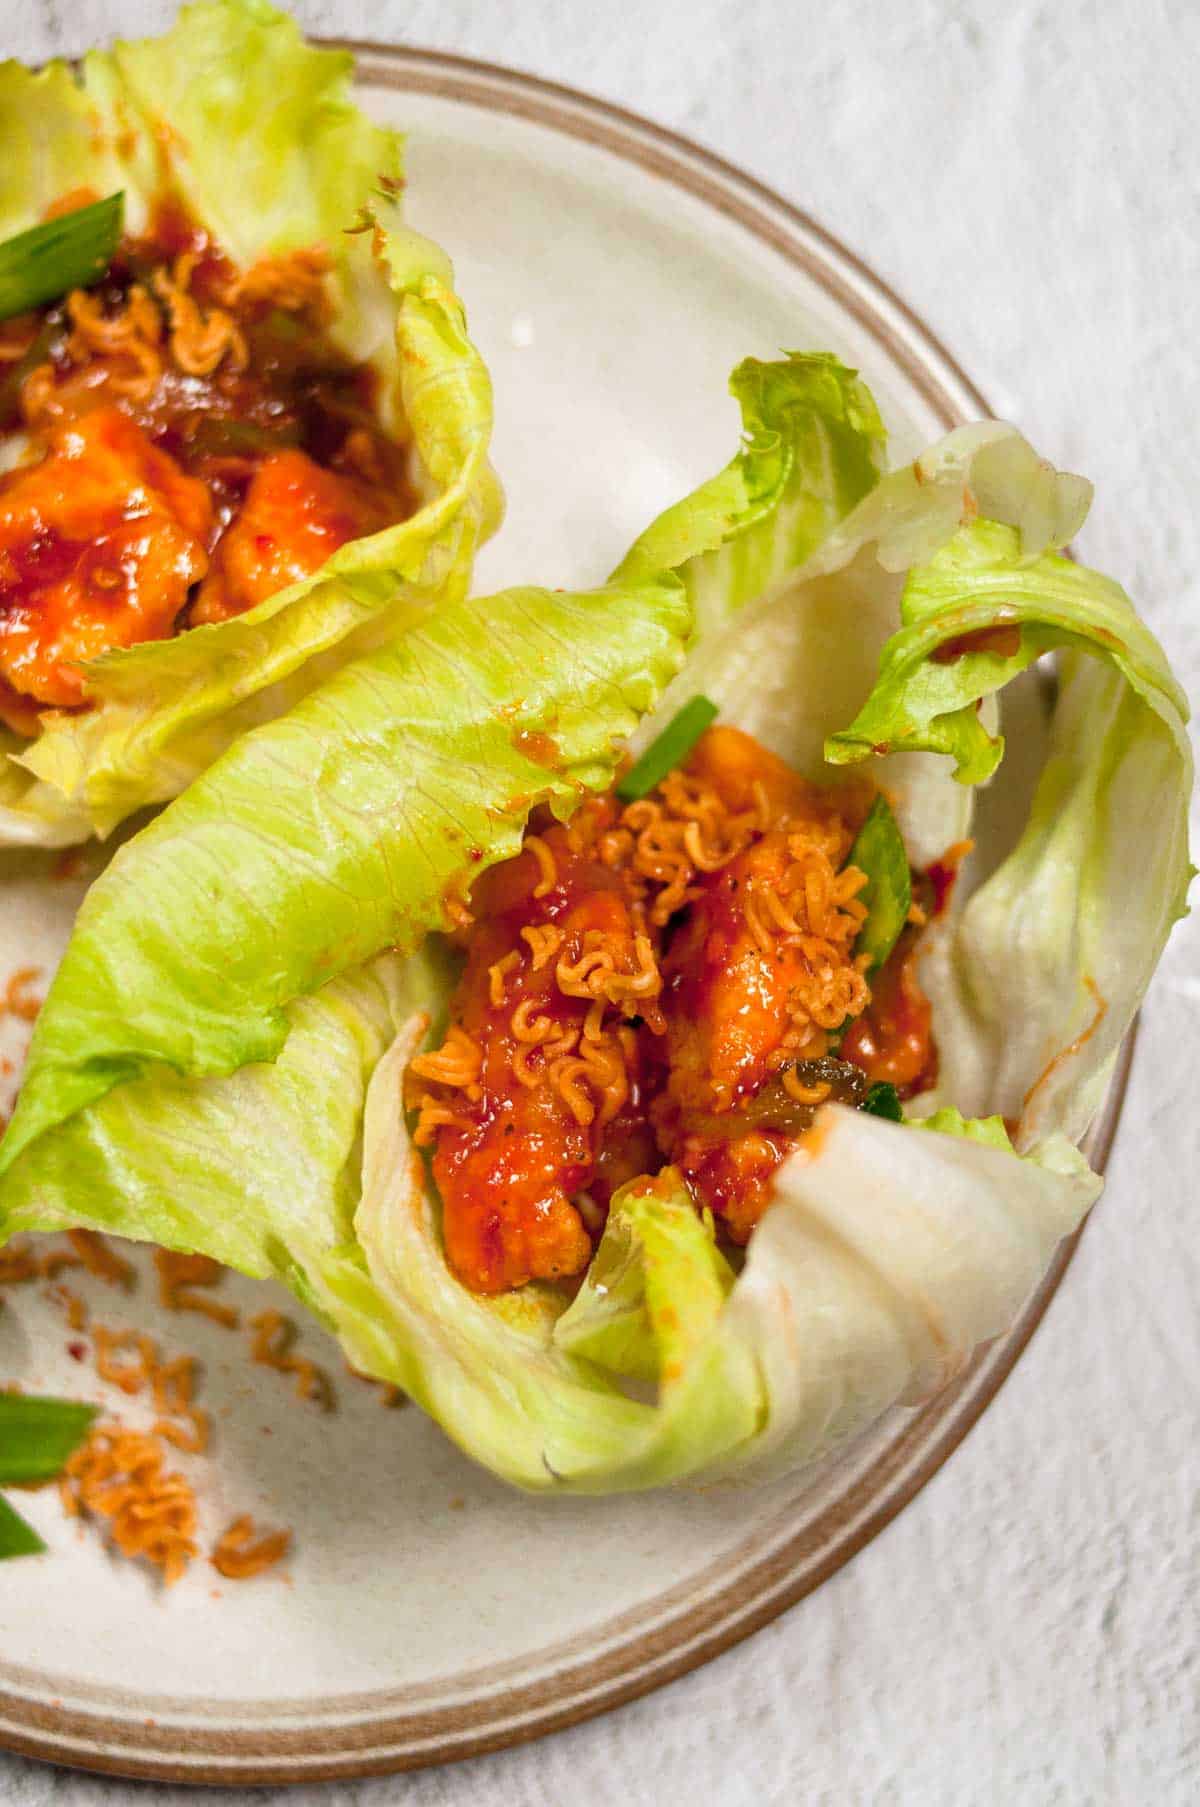 A close up shot lettuce wrap in the plate.